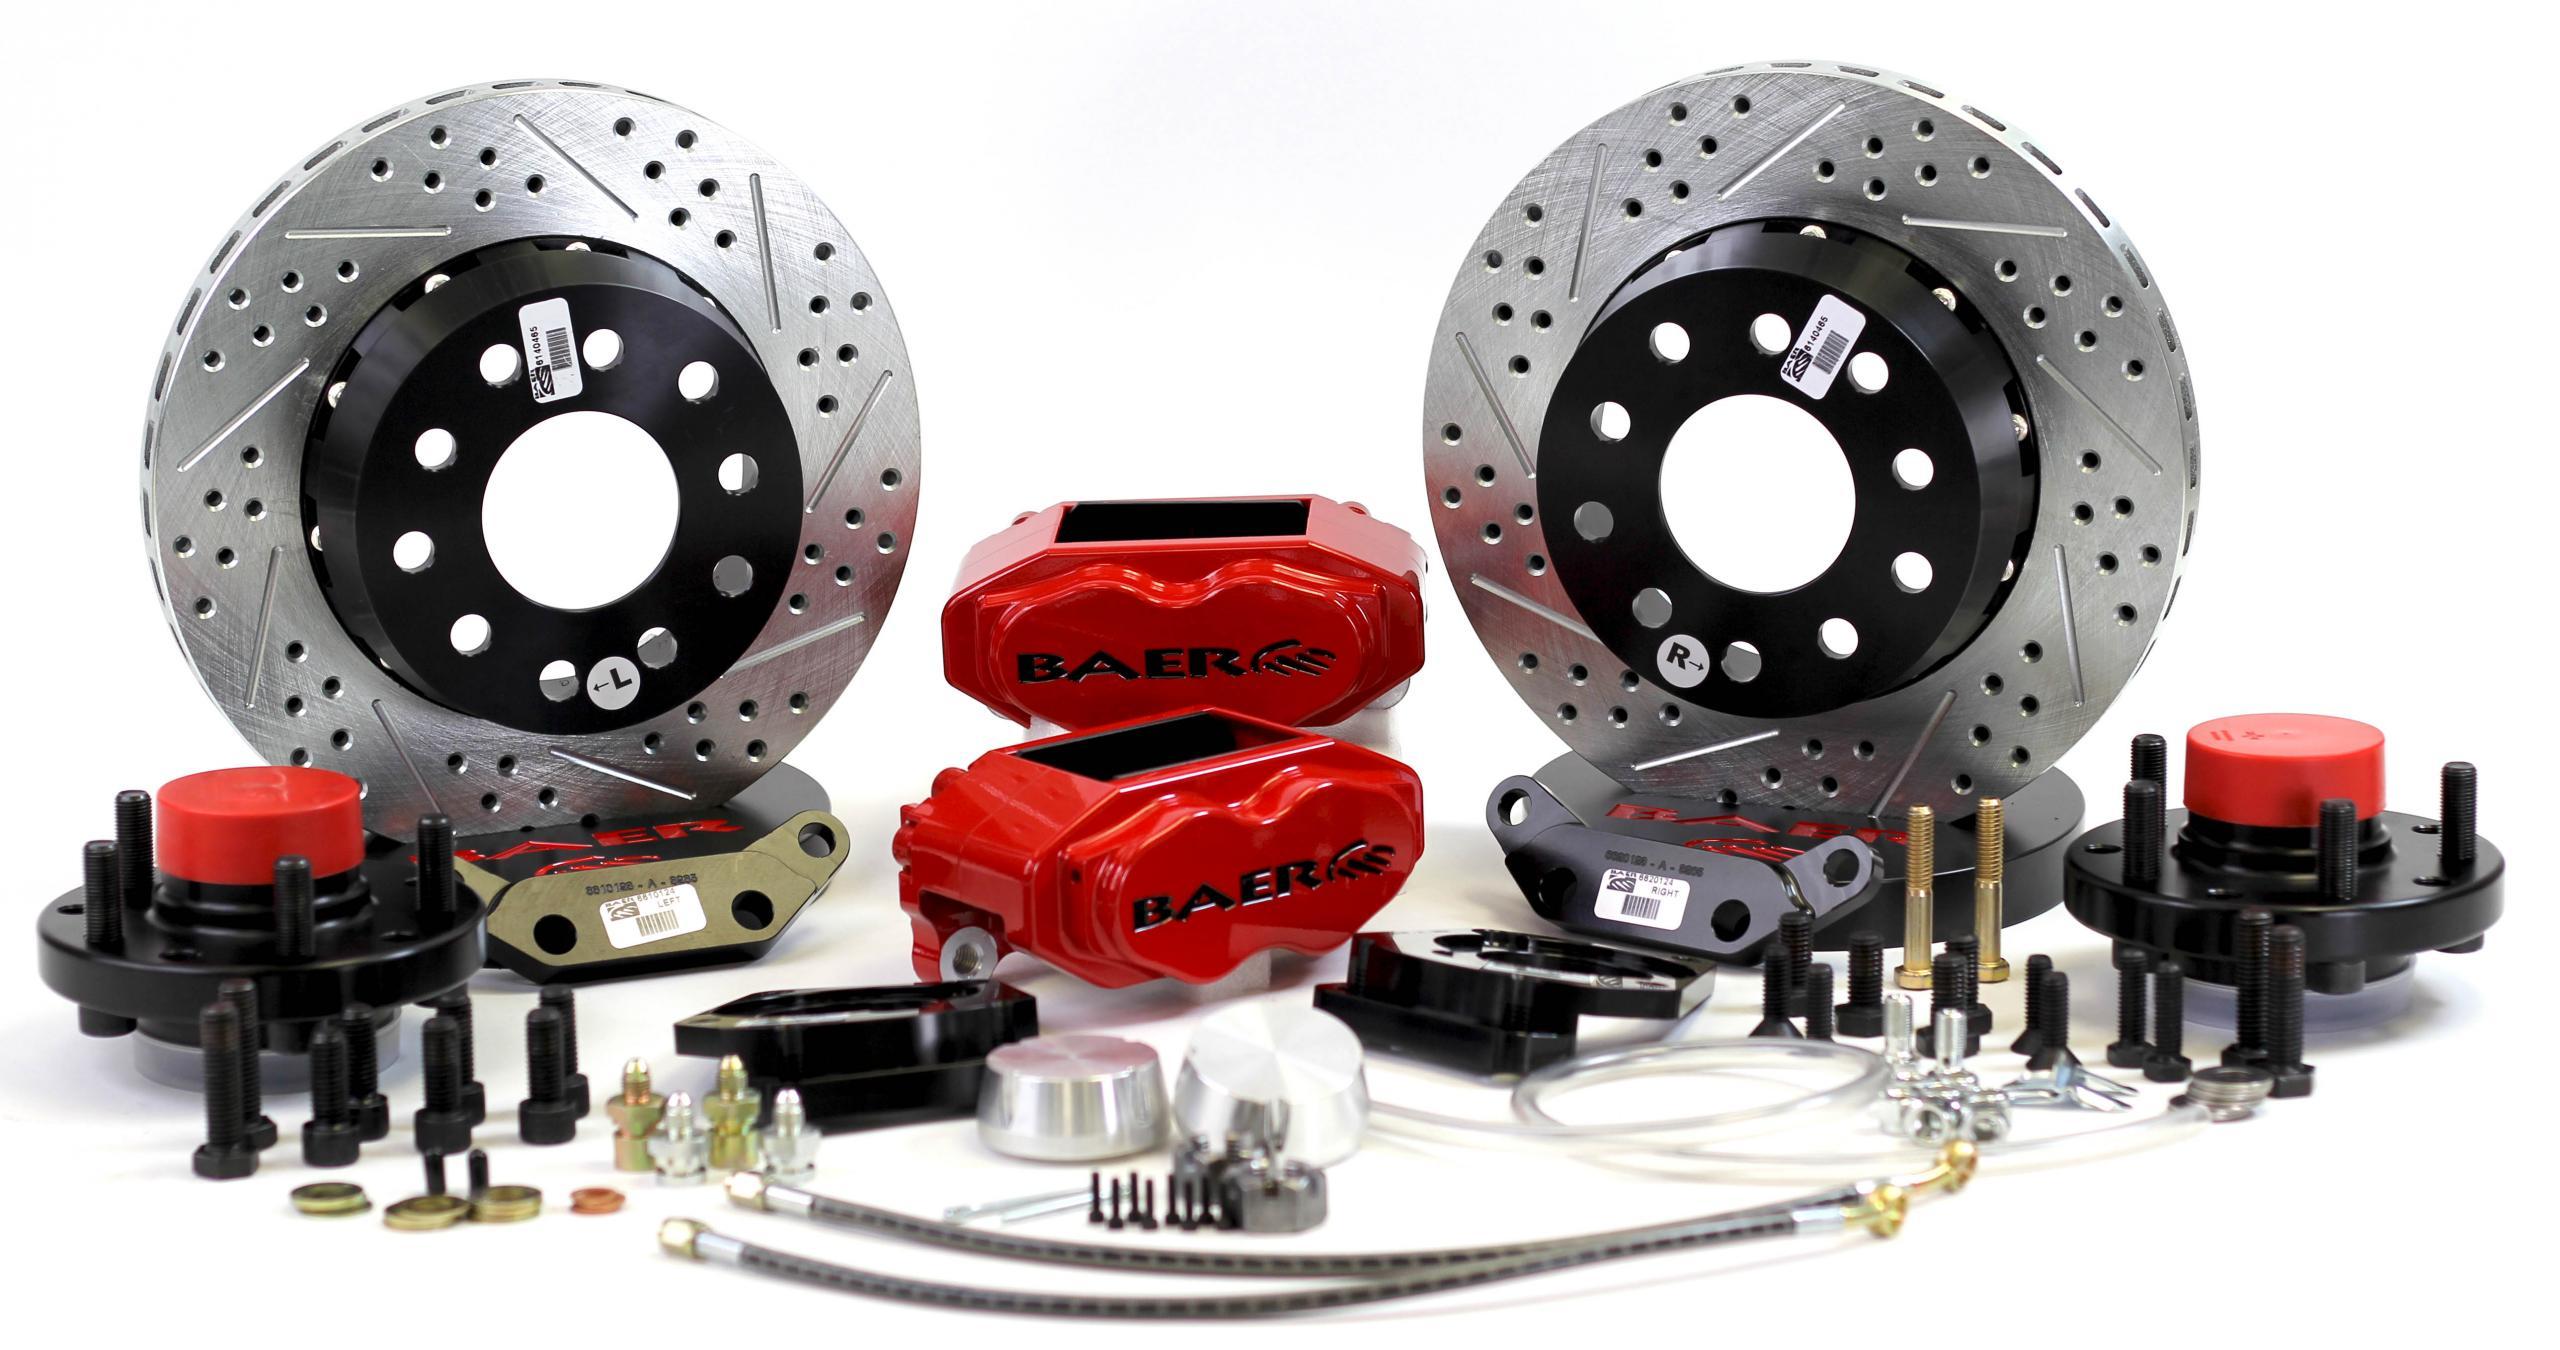 Baer Brakes 4301432R - Brake System, SS4 Plus, Front, 4 Piston Caliper, 11.000 in Drilled / Slotted, 2 Piece Rotor, Aluminum, Red, GM A-Body / F-Body / X-Body, Kit